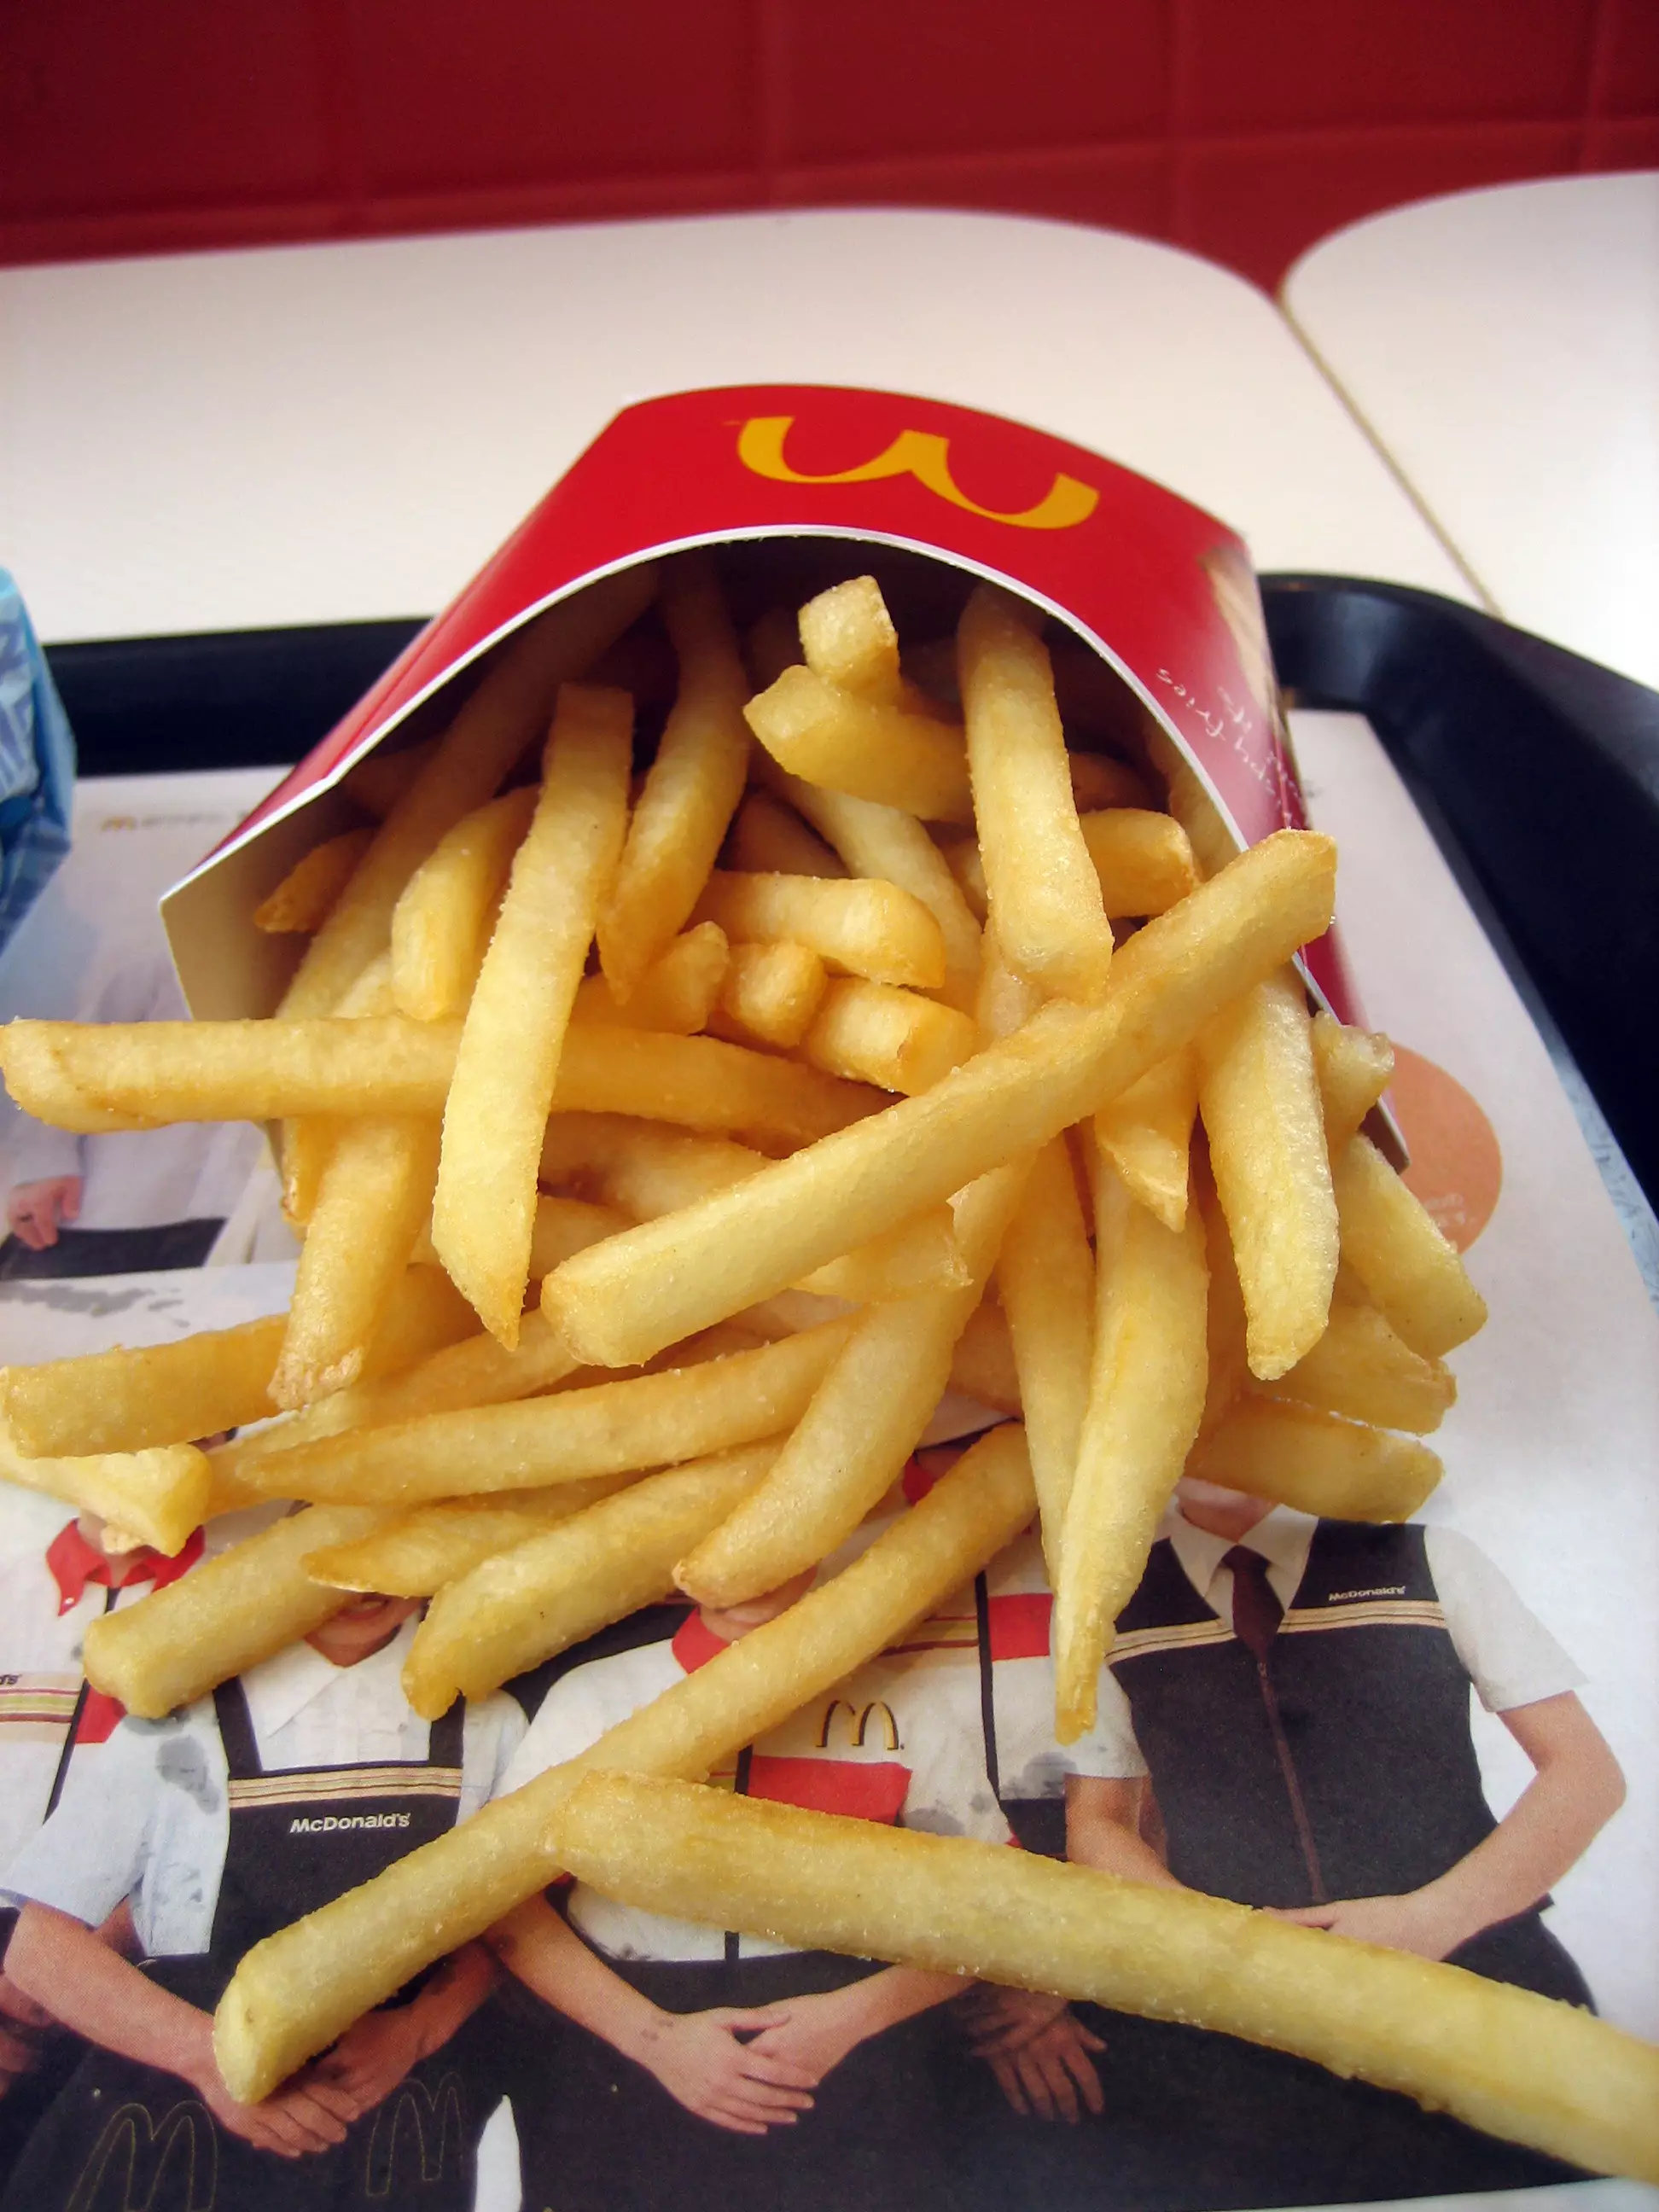 McDonald's is giving away a medium portions of the chain's famous fries. (